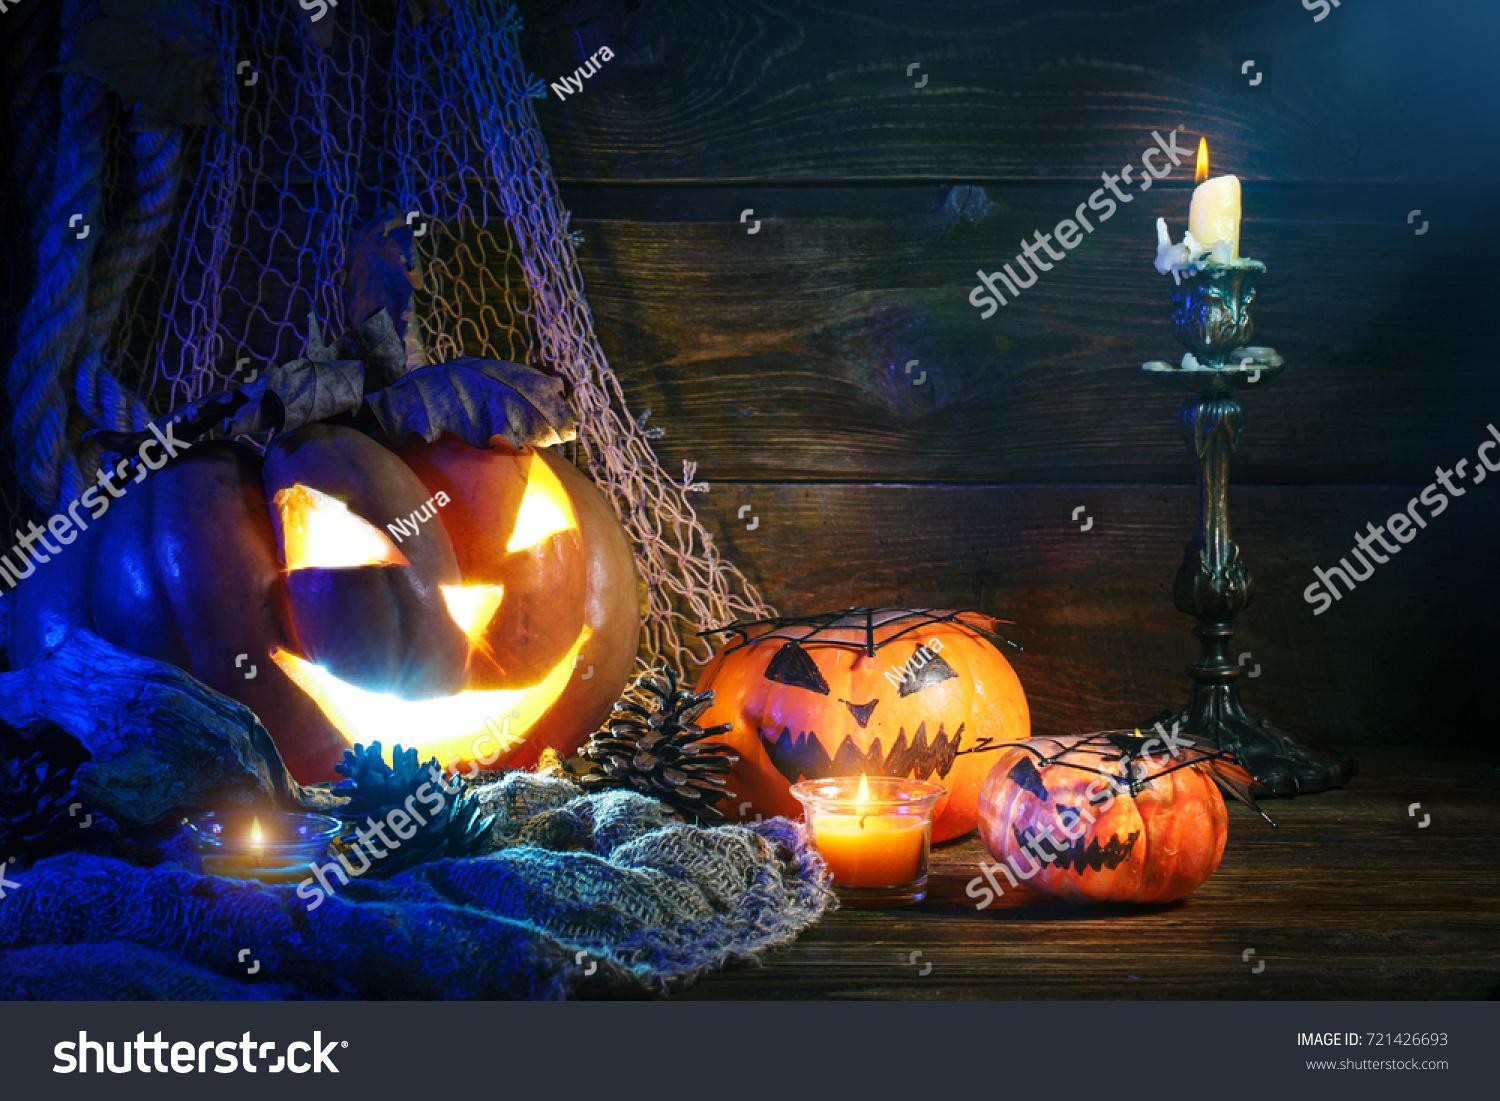 Halloween pumpkins on a wooden table at night. #721426693